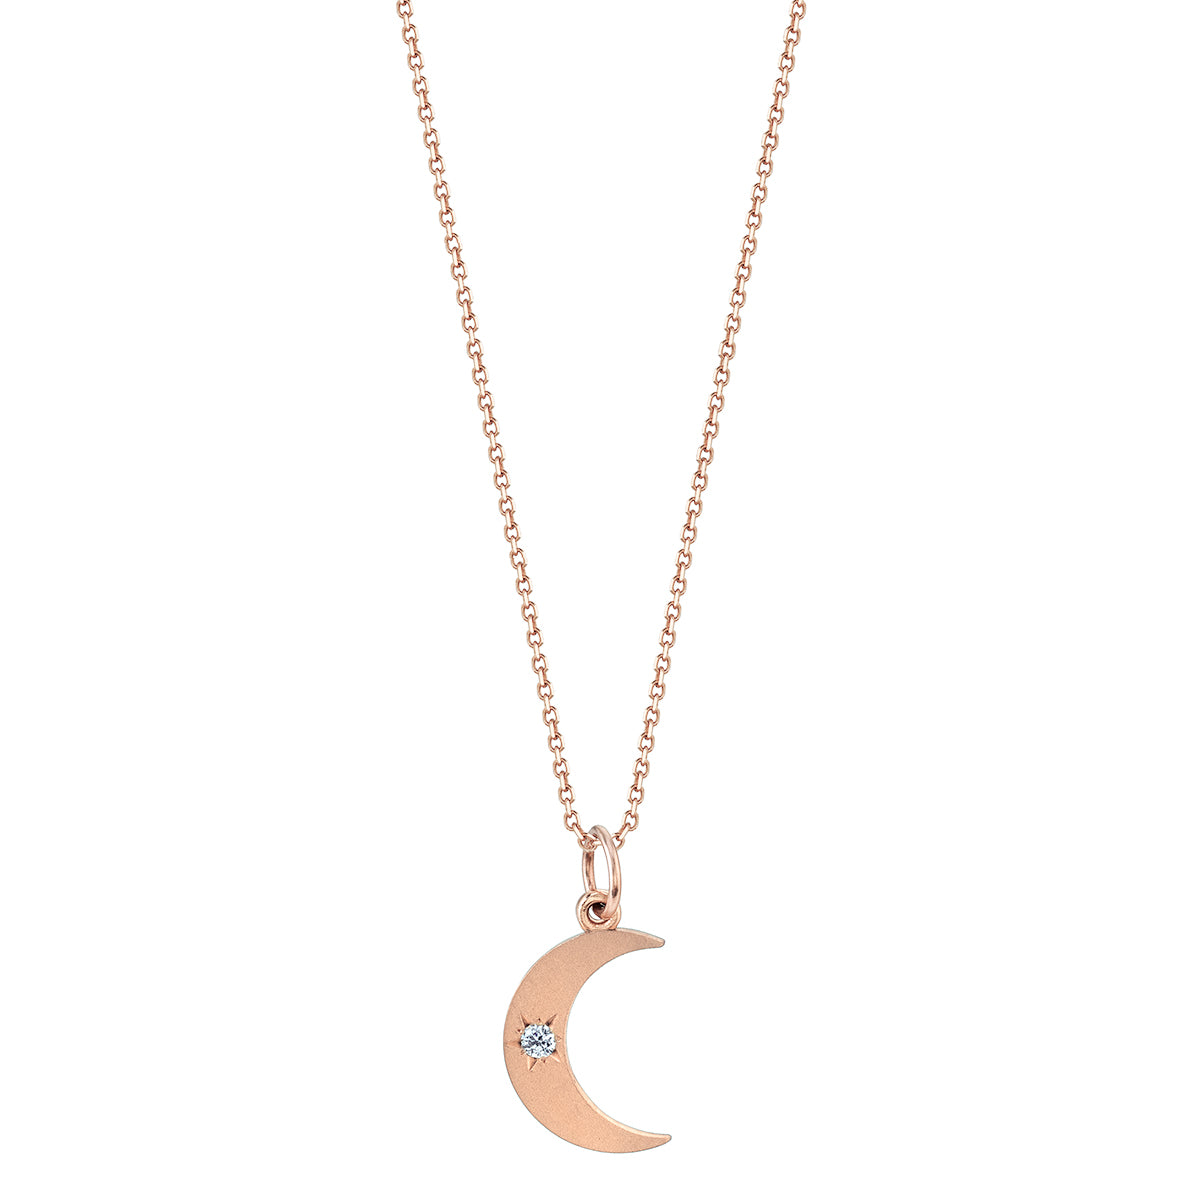 Pendant in 18k rose gold with diamonds, small.